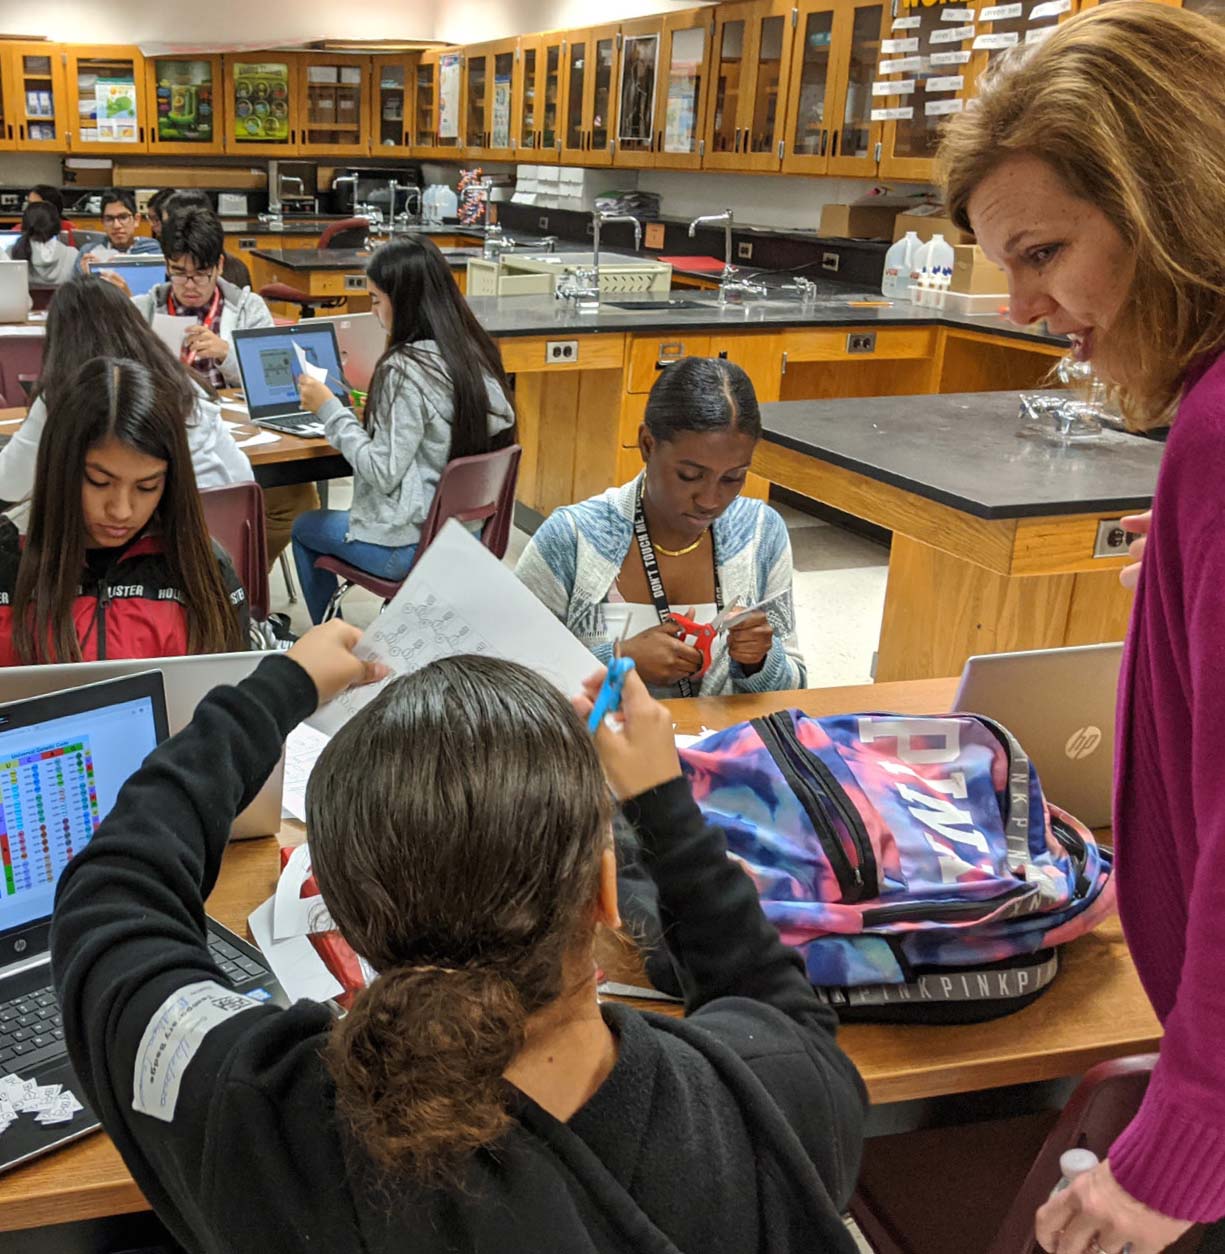 During the Learning Walk hosted for the “Districts for Impact” Five Conditions Learning Cadre, Assistant Superintendent for Middle Schools Marcy Hetzler-Nettles interacts with students from Immokalee High School.